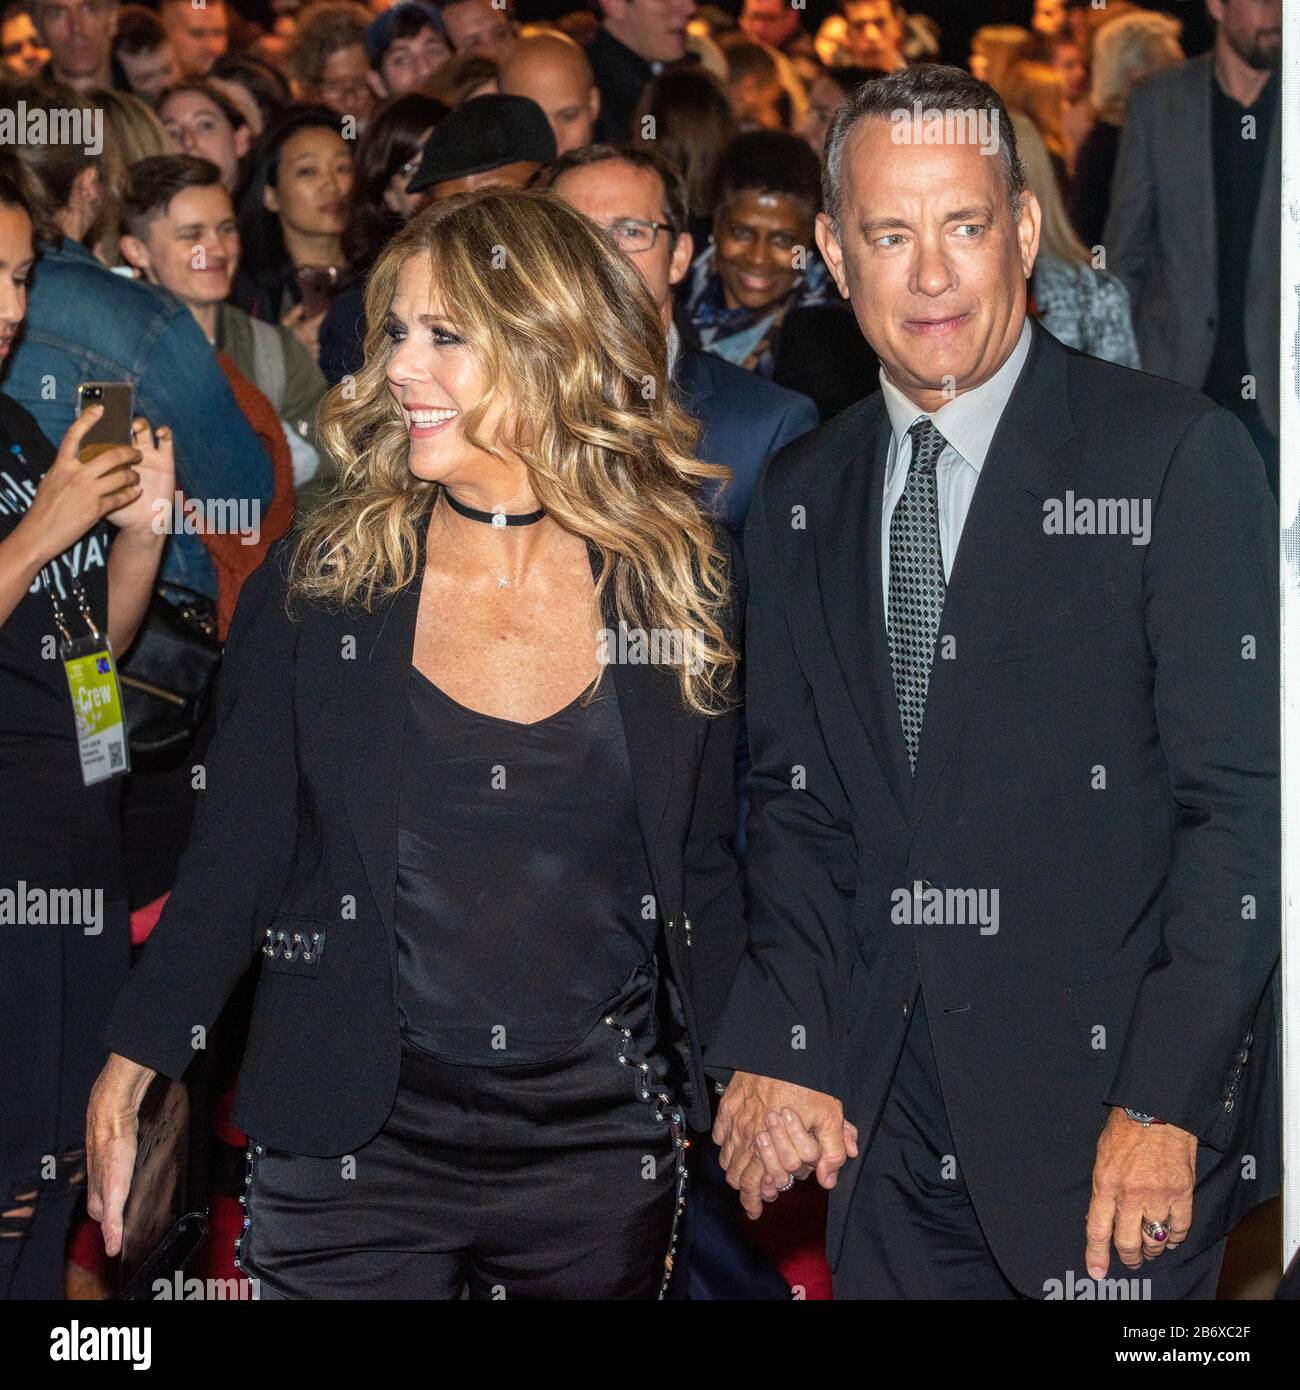 Actor Tom Hanks arrives with his wife Rita Wilson to attend the World Premiere of 'The Circle' at the 2017 Tribeca Film Festival in New York on April Stock Photo